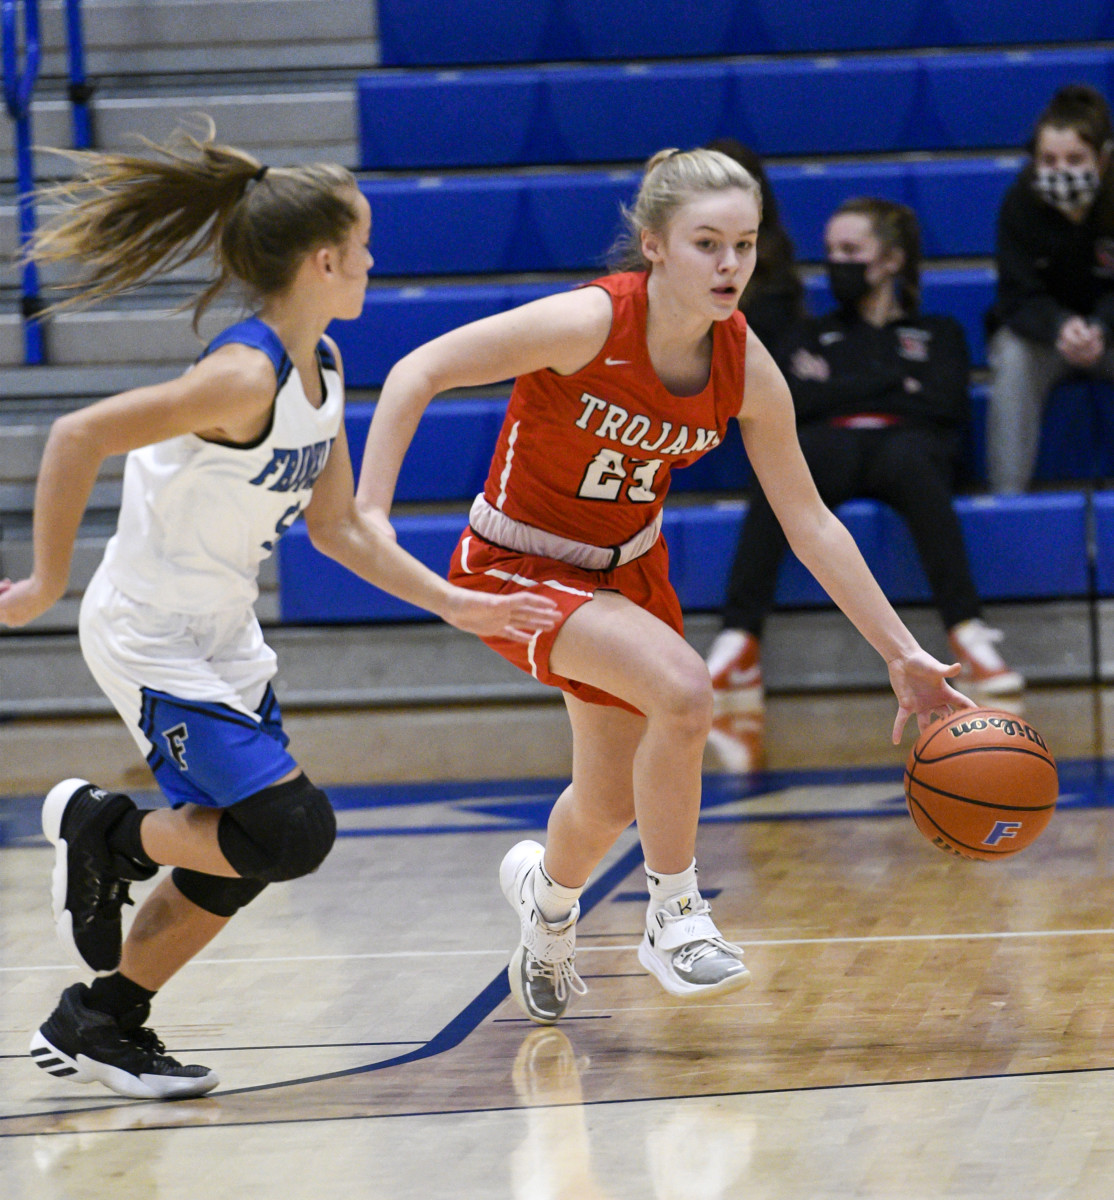 Center Grove sophomore Ella Hobson brings the basketball up up court around Franklin freshman Lauren Klem during Center Grove’s 29-30 loss at Franklin Community High School.